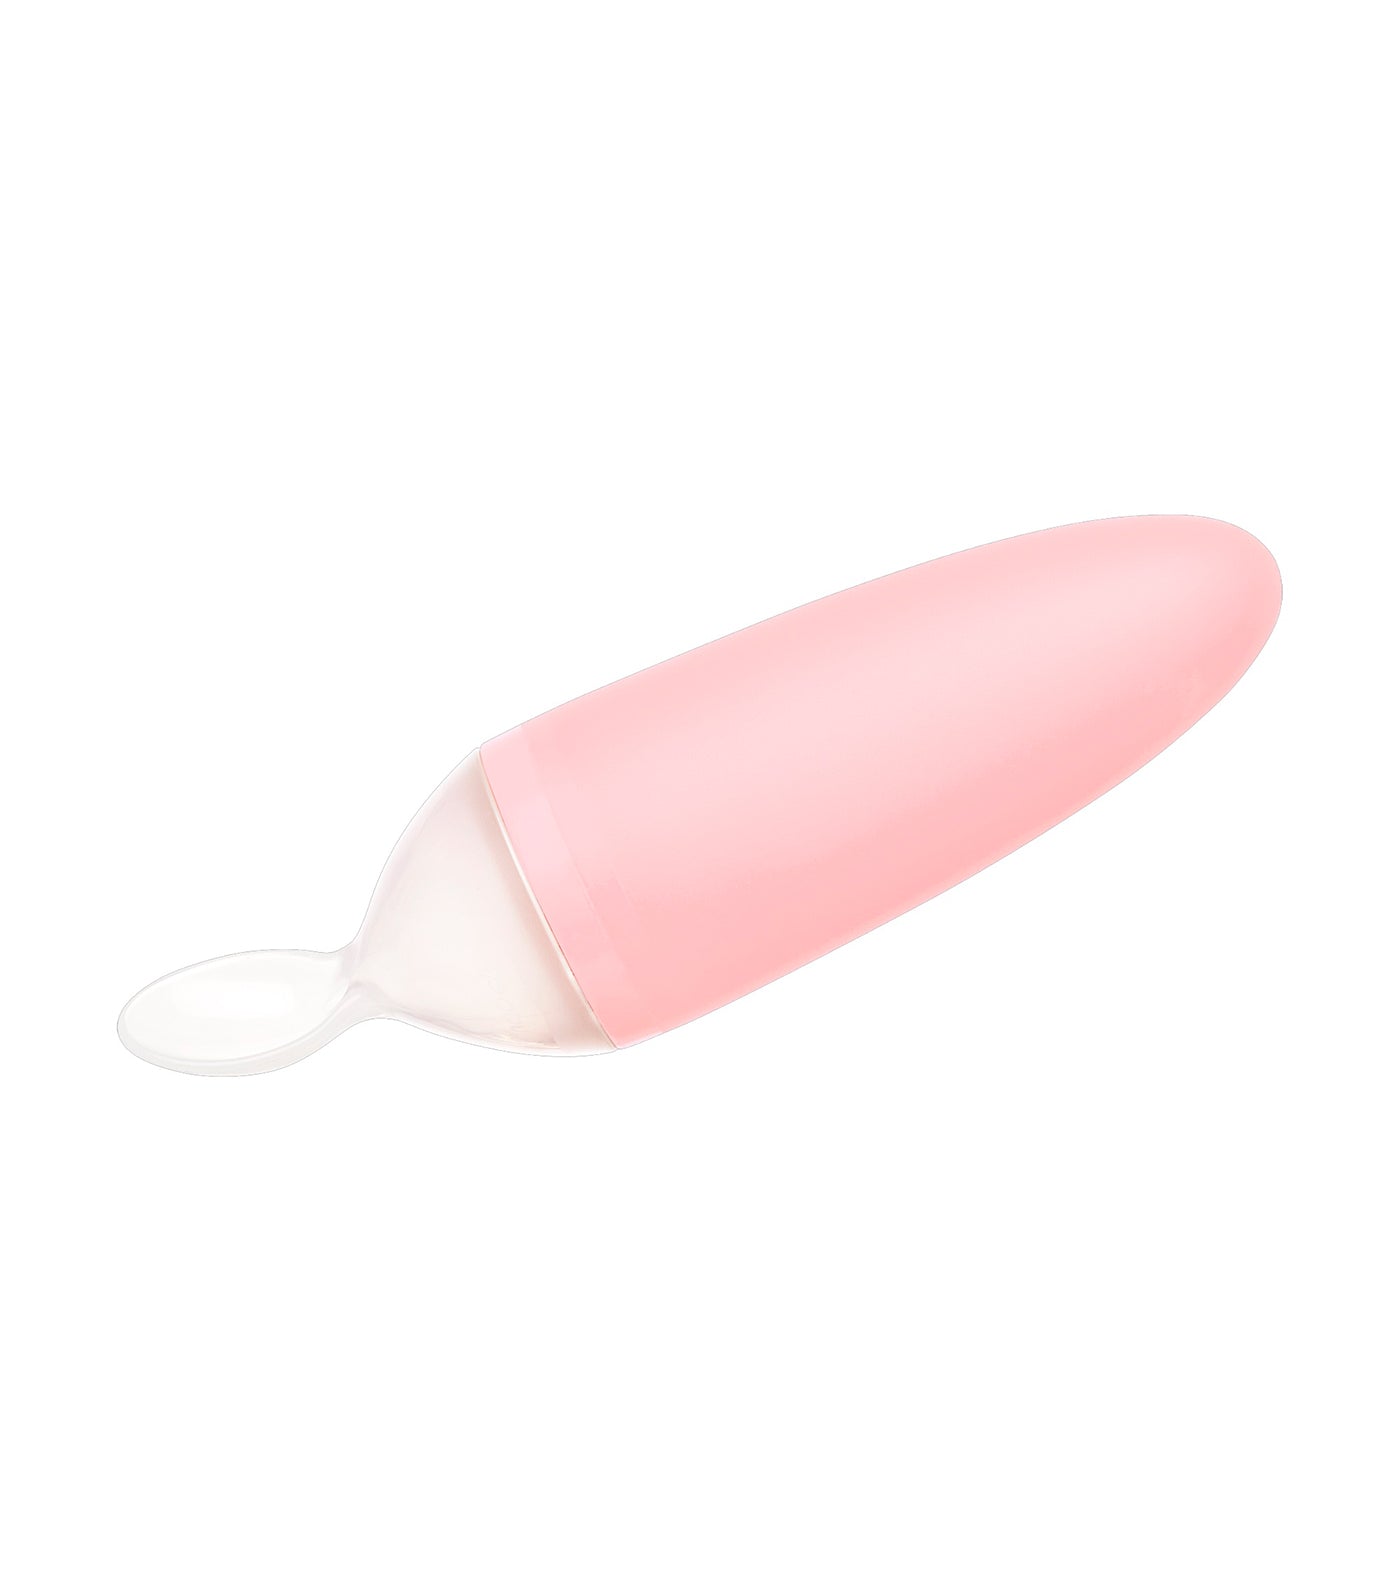 SQUIRT Baby Food Dispensing Spoon Light Pink